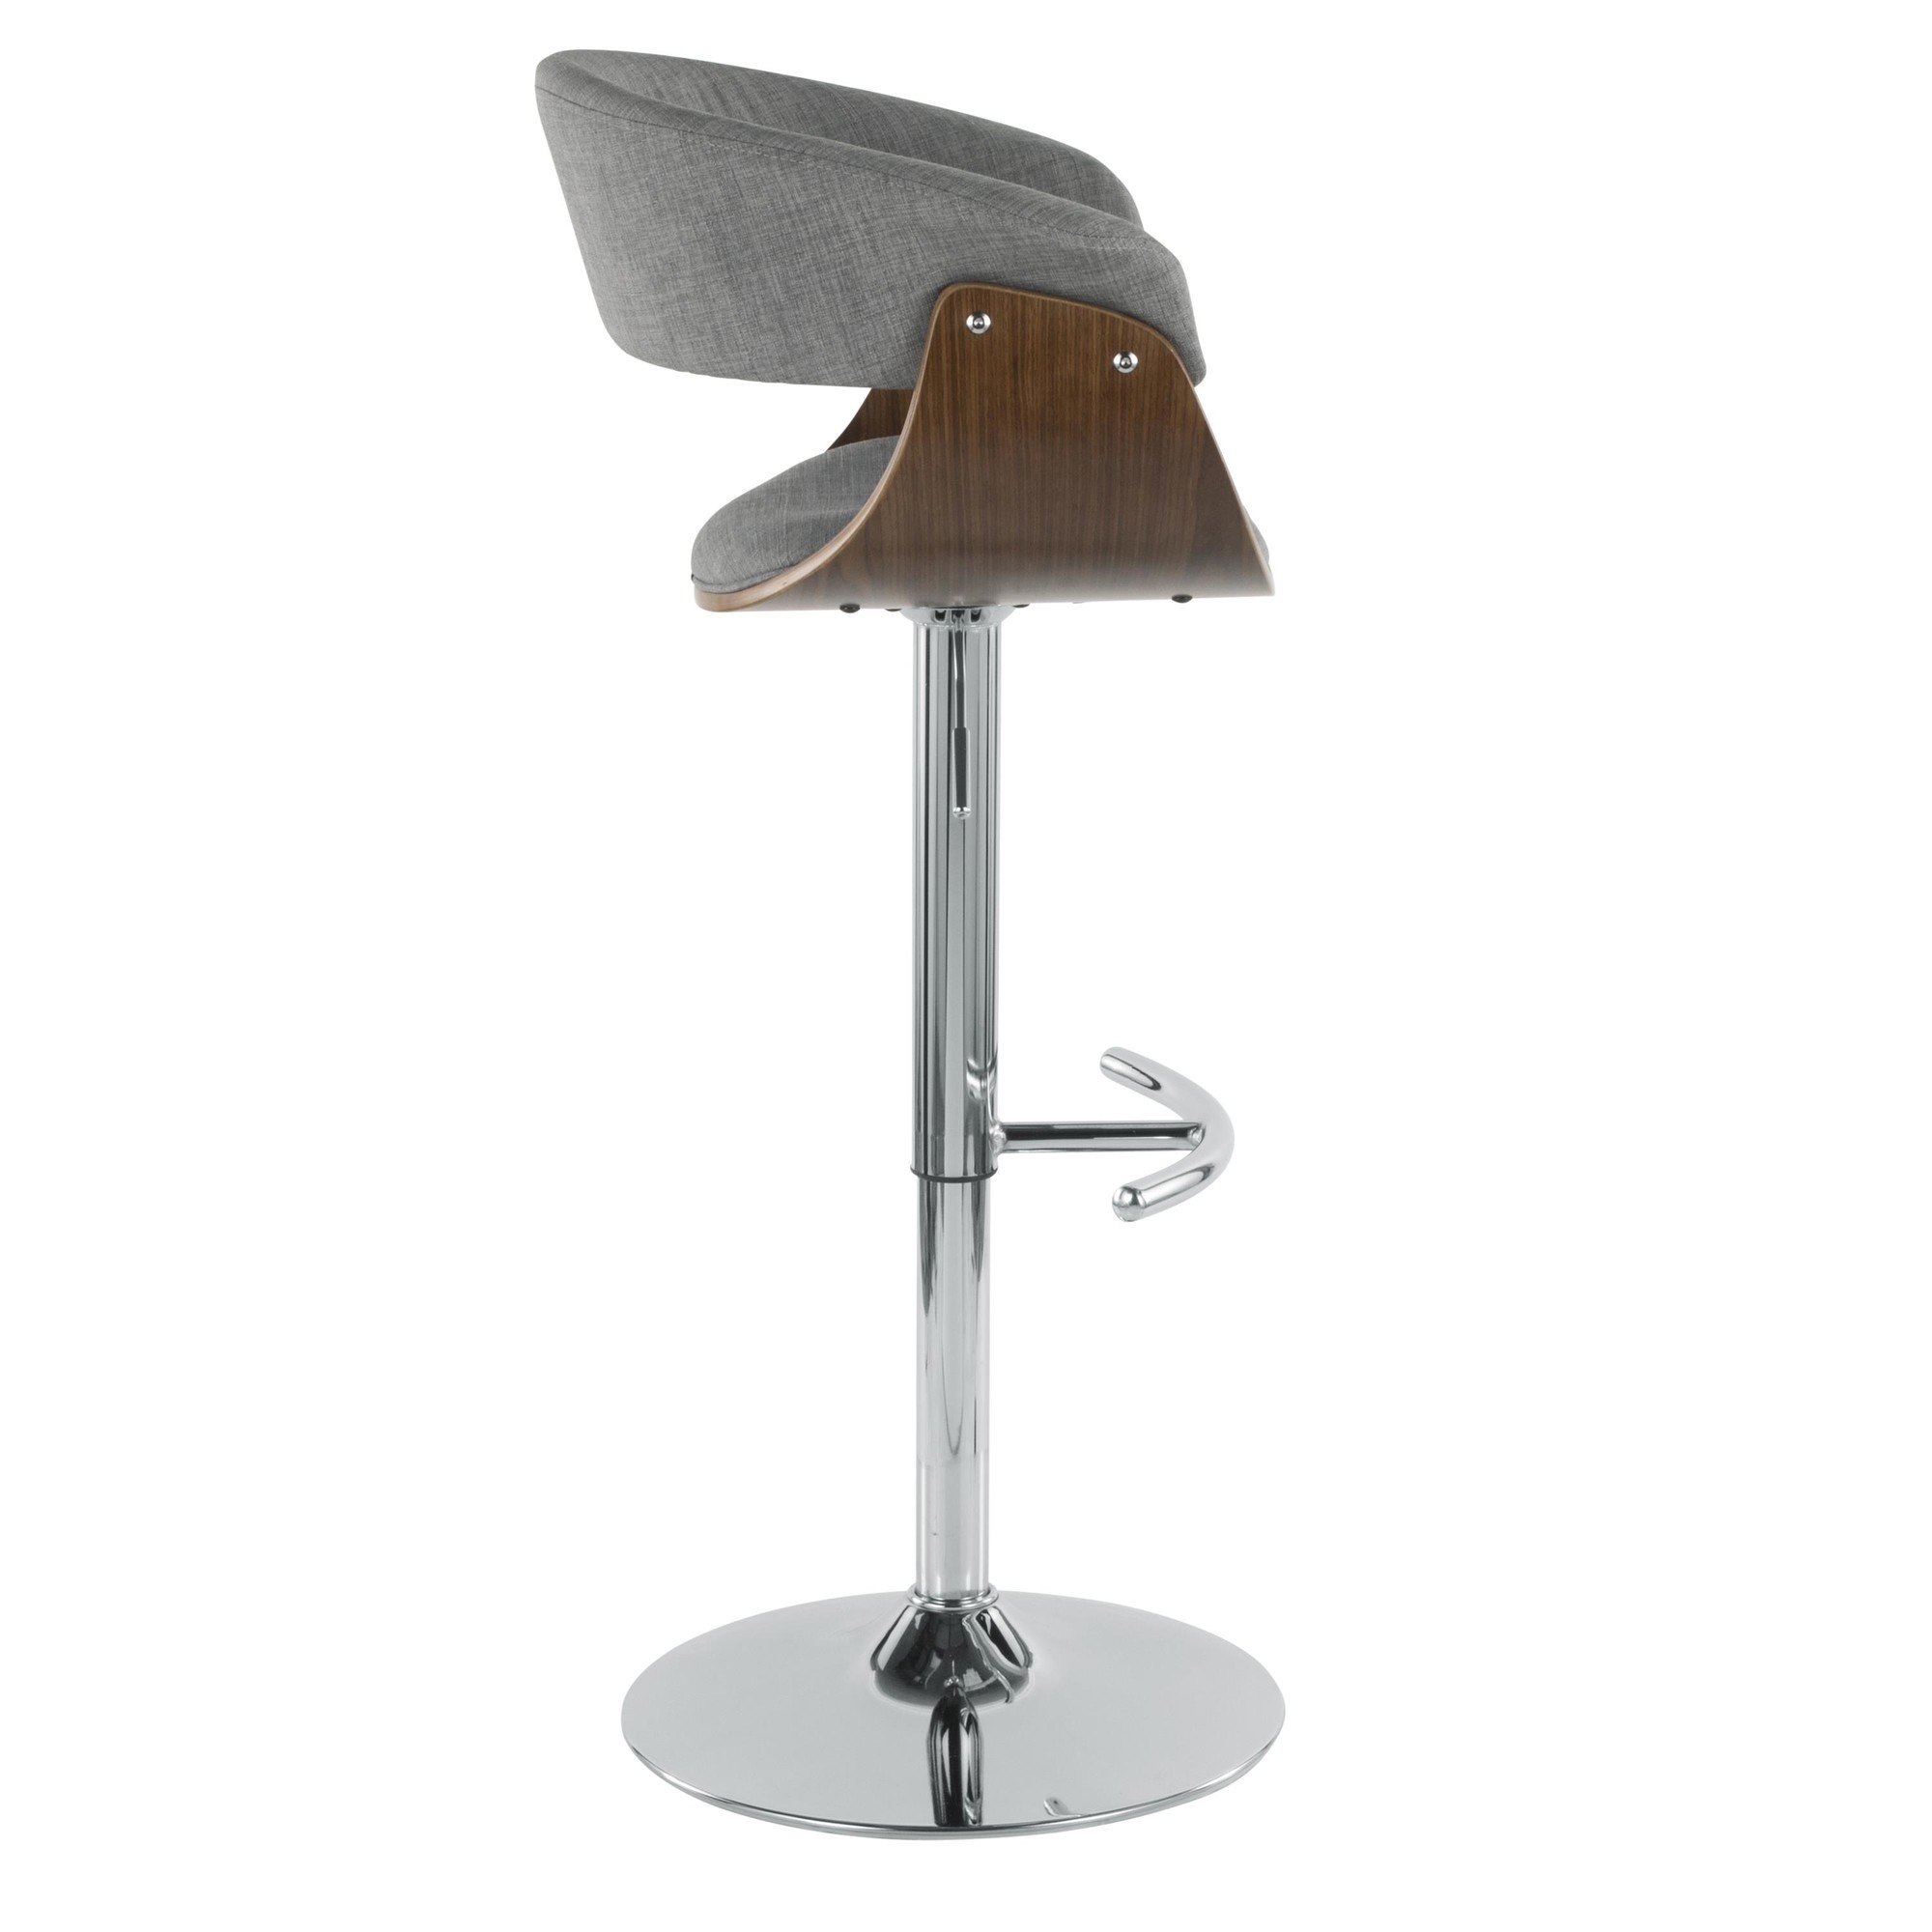 Contemporary Home Living 44.5" Vintage Mod Mid-Century Modern Adjustable Barstool with Swivel in Walnut and Light Grey